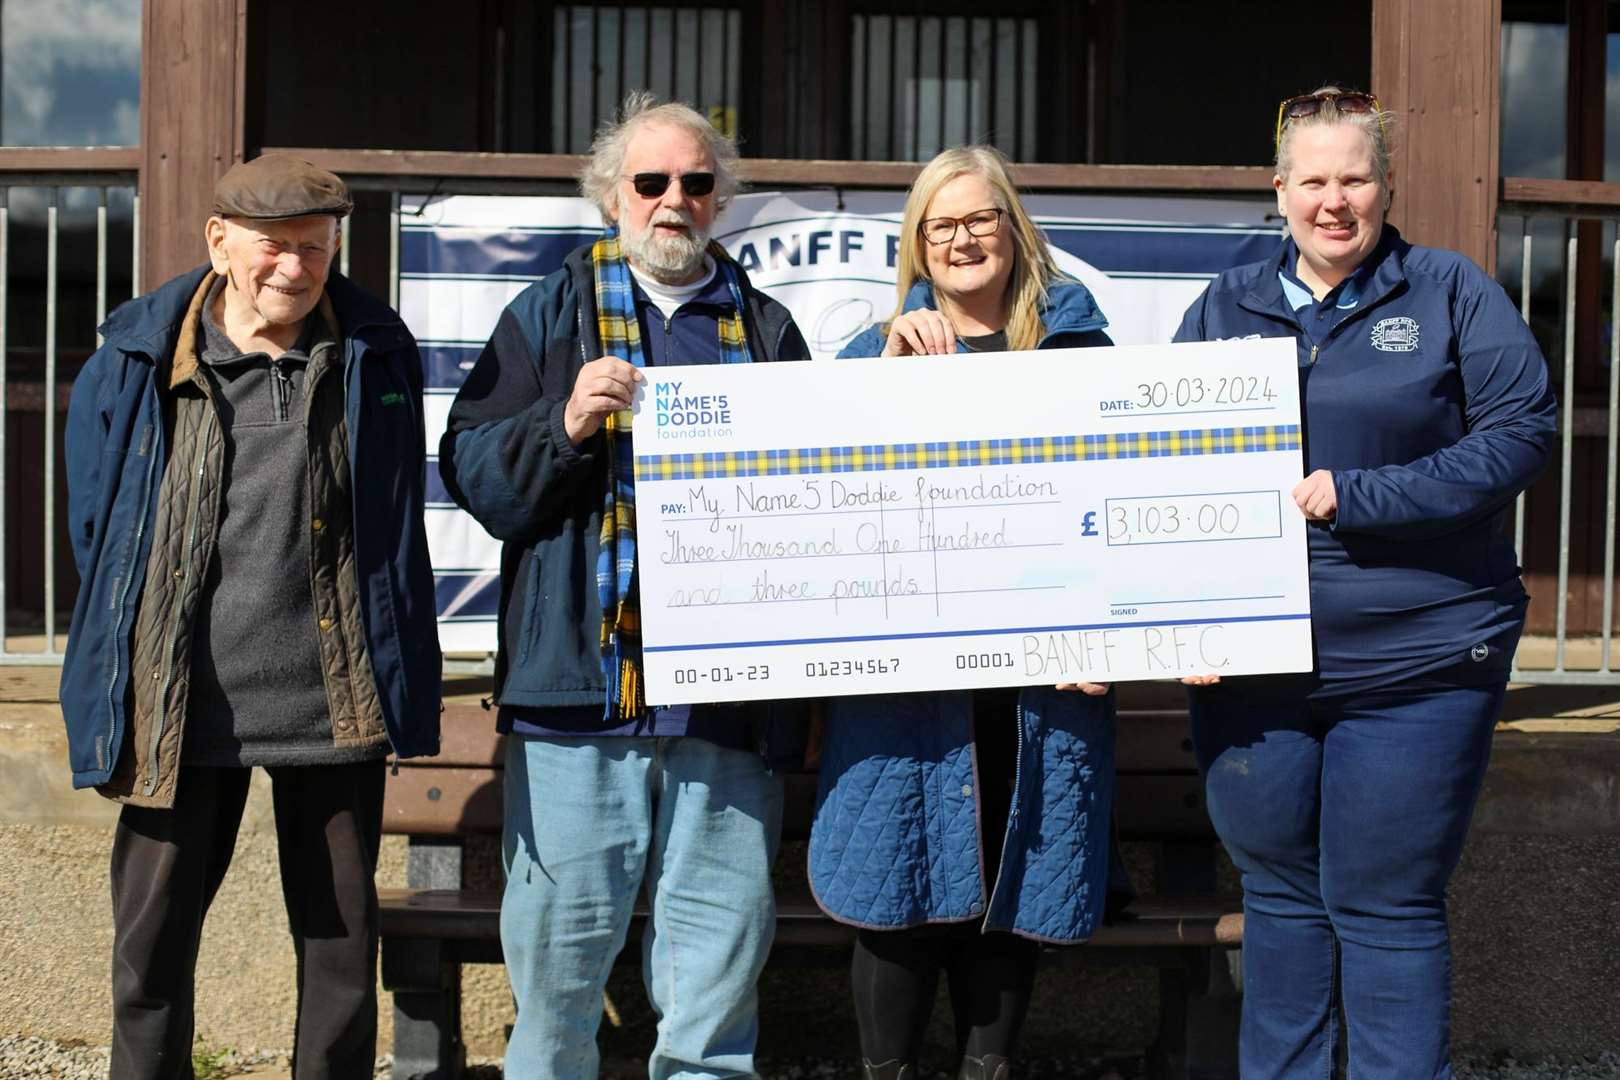 Former club president Bob Philips presented the cheque for £3,103 to My Name’5 Doddie Foundation volunteer Morven Mackenzie. Picture: Annie Rees